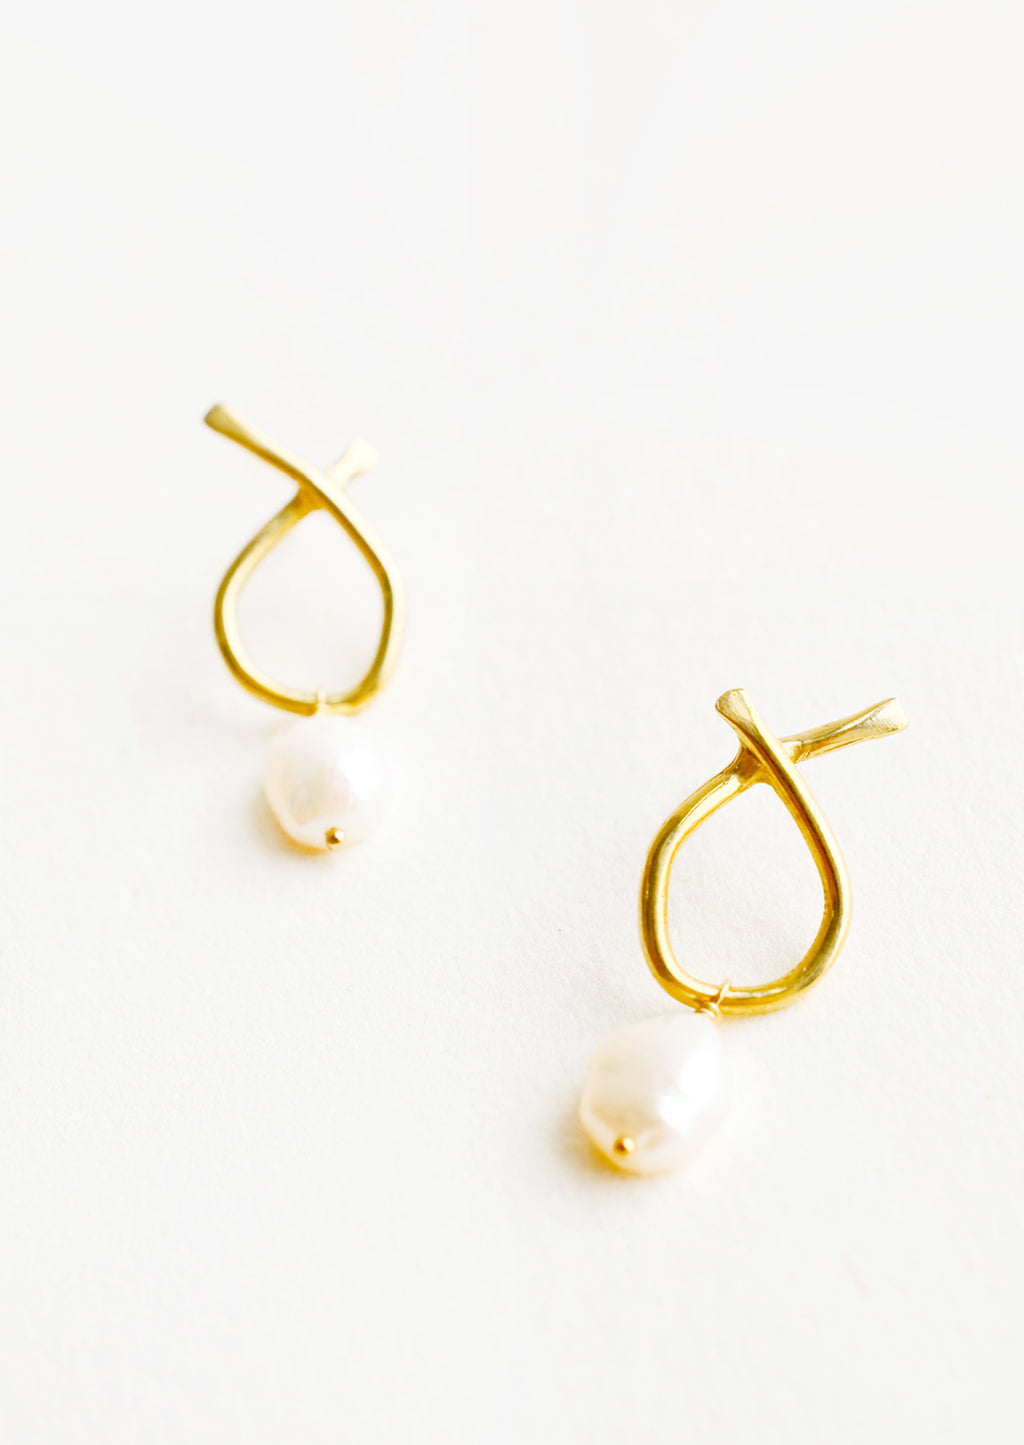 Brass: Pair of brass earrings featuring a slim asymmetrical frame on a post back and dangling pearl.